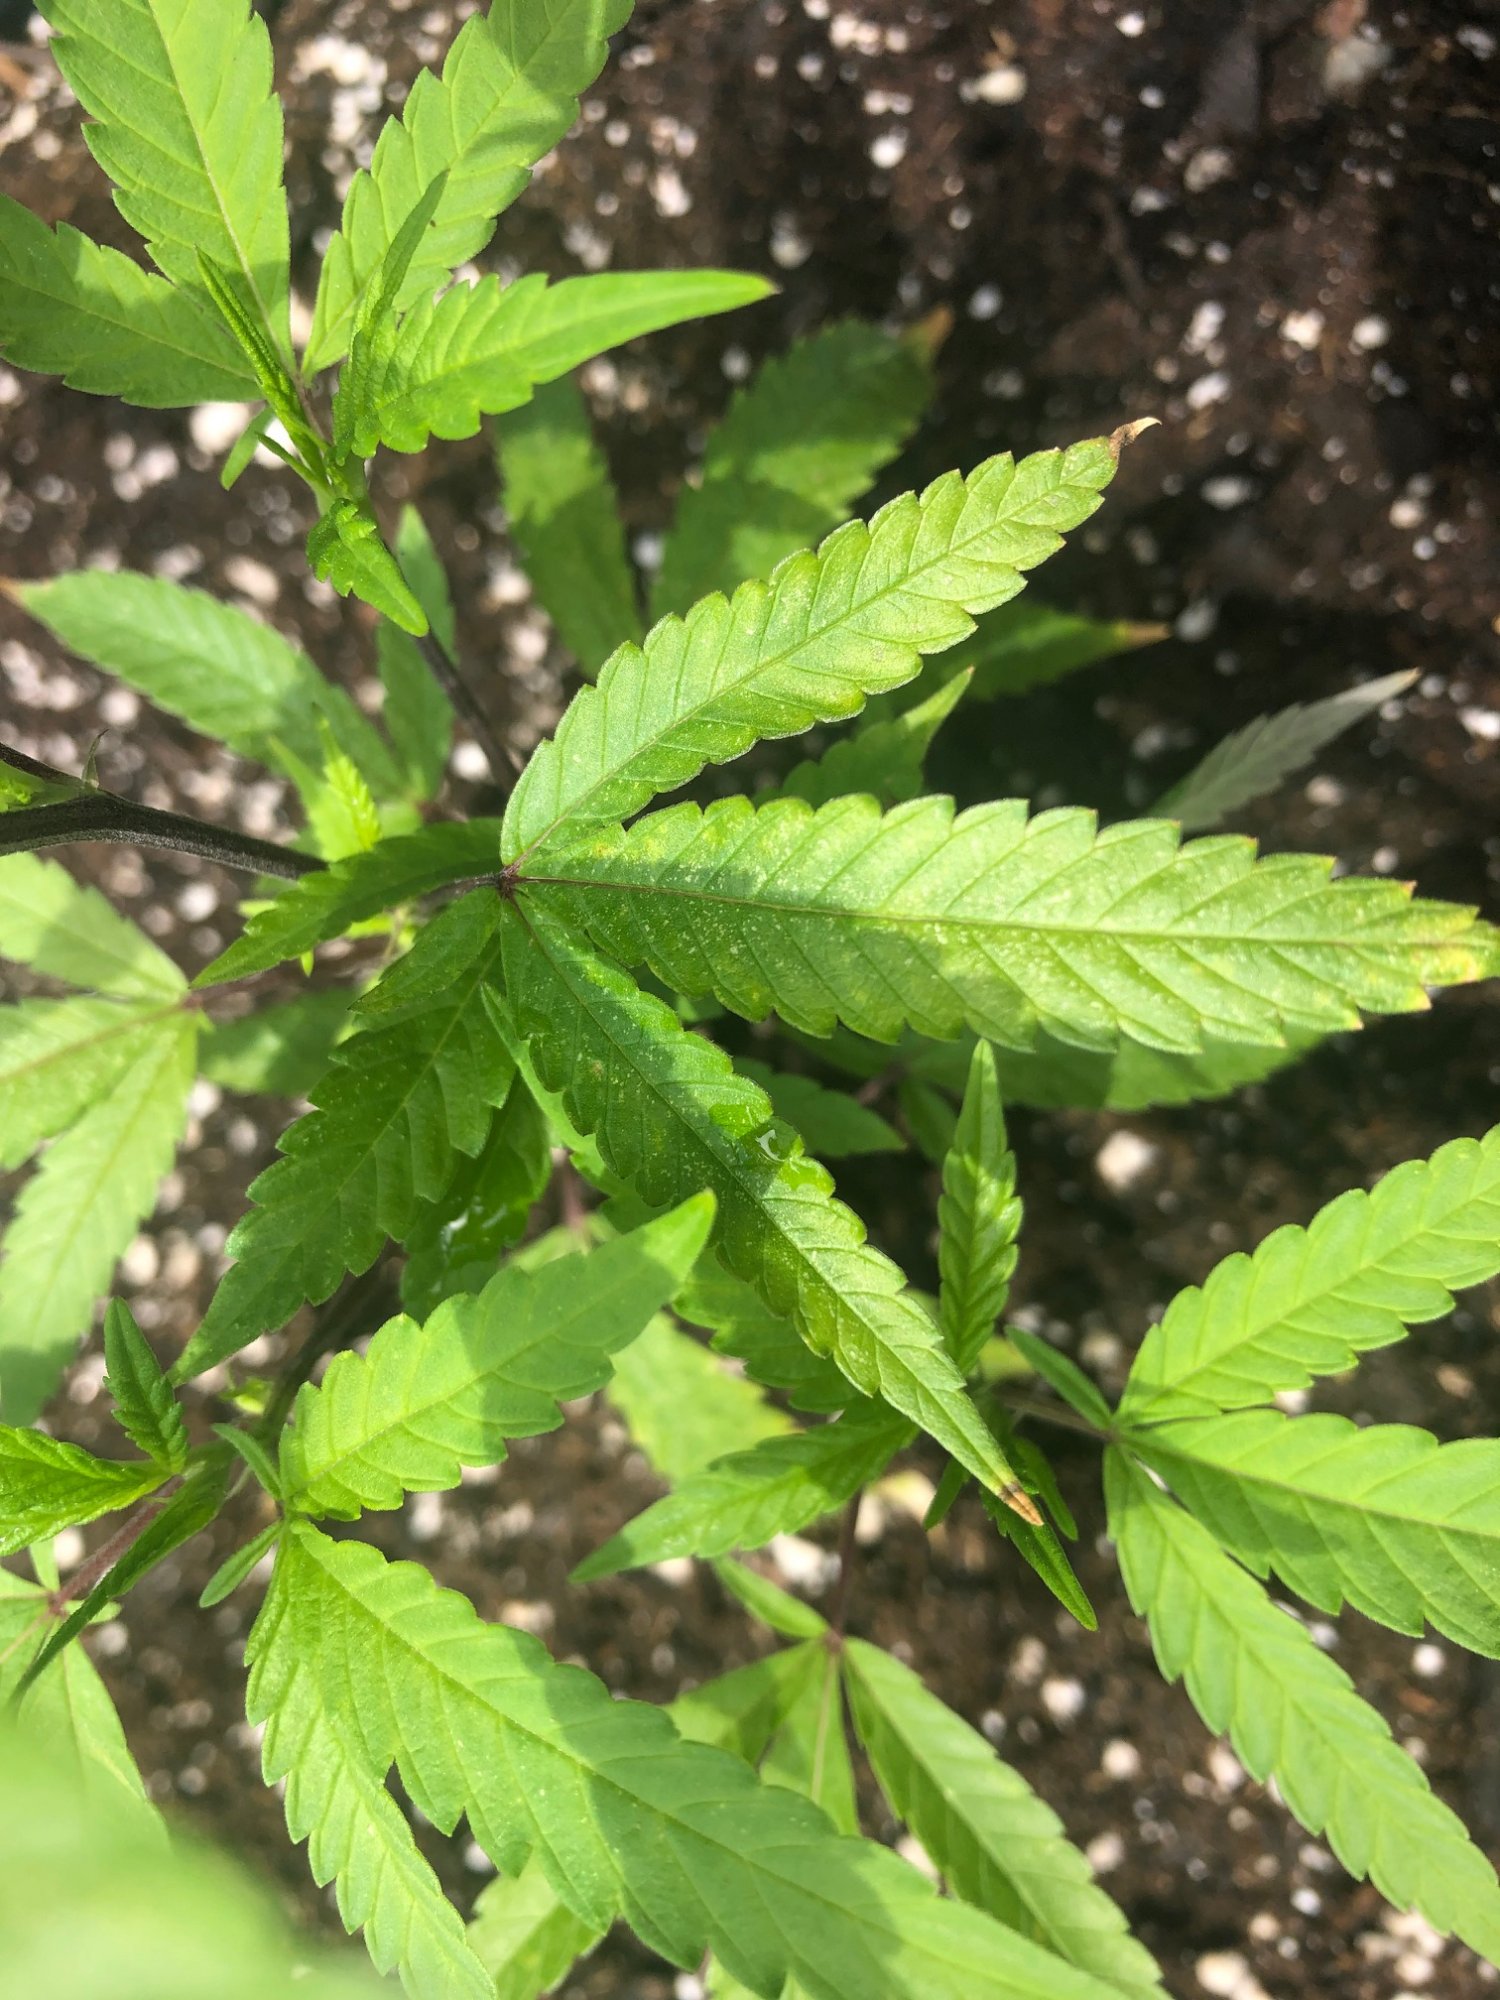 Whitish brown spotting on brand new clones 2